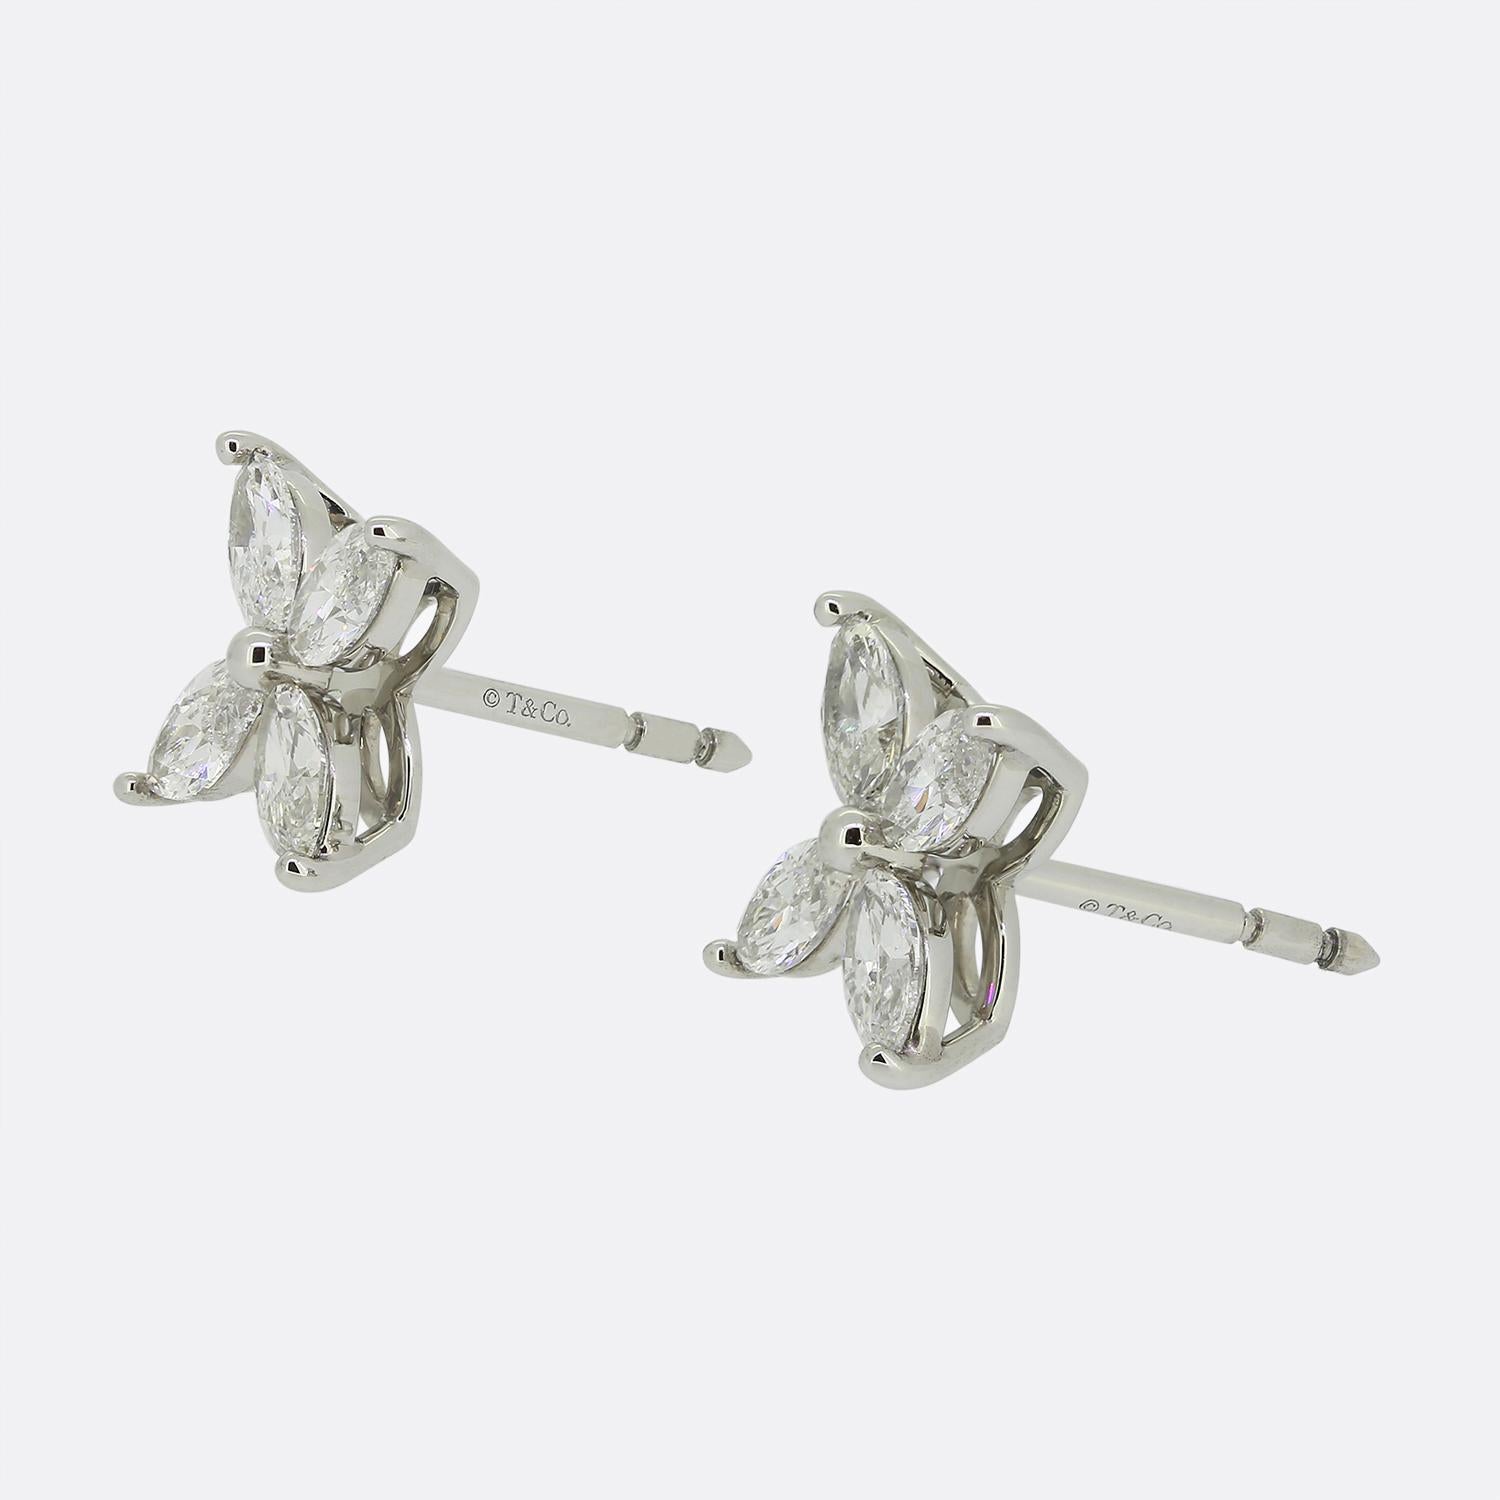 This is a fabulous pair of Tiffany & Co. Victoria diamond earrings. Each piece has been crafted in platinum and set with four sparkling marquise-shaped diamonds collectively weighing an estimated 1.62 carats.

The beautiful shape of these classic